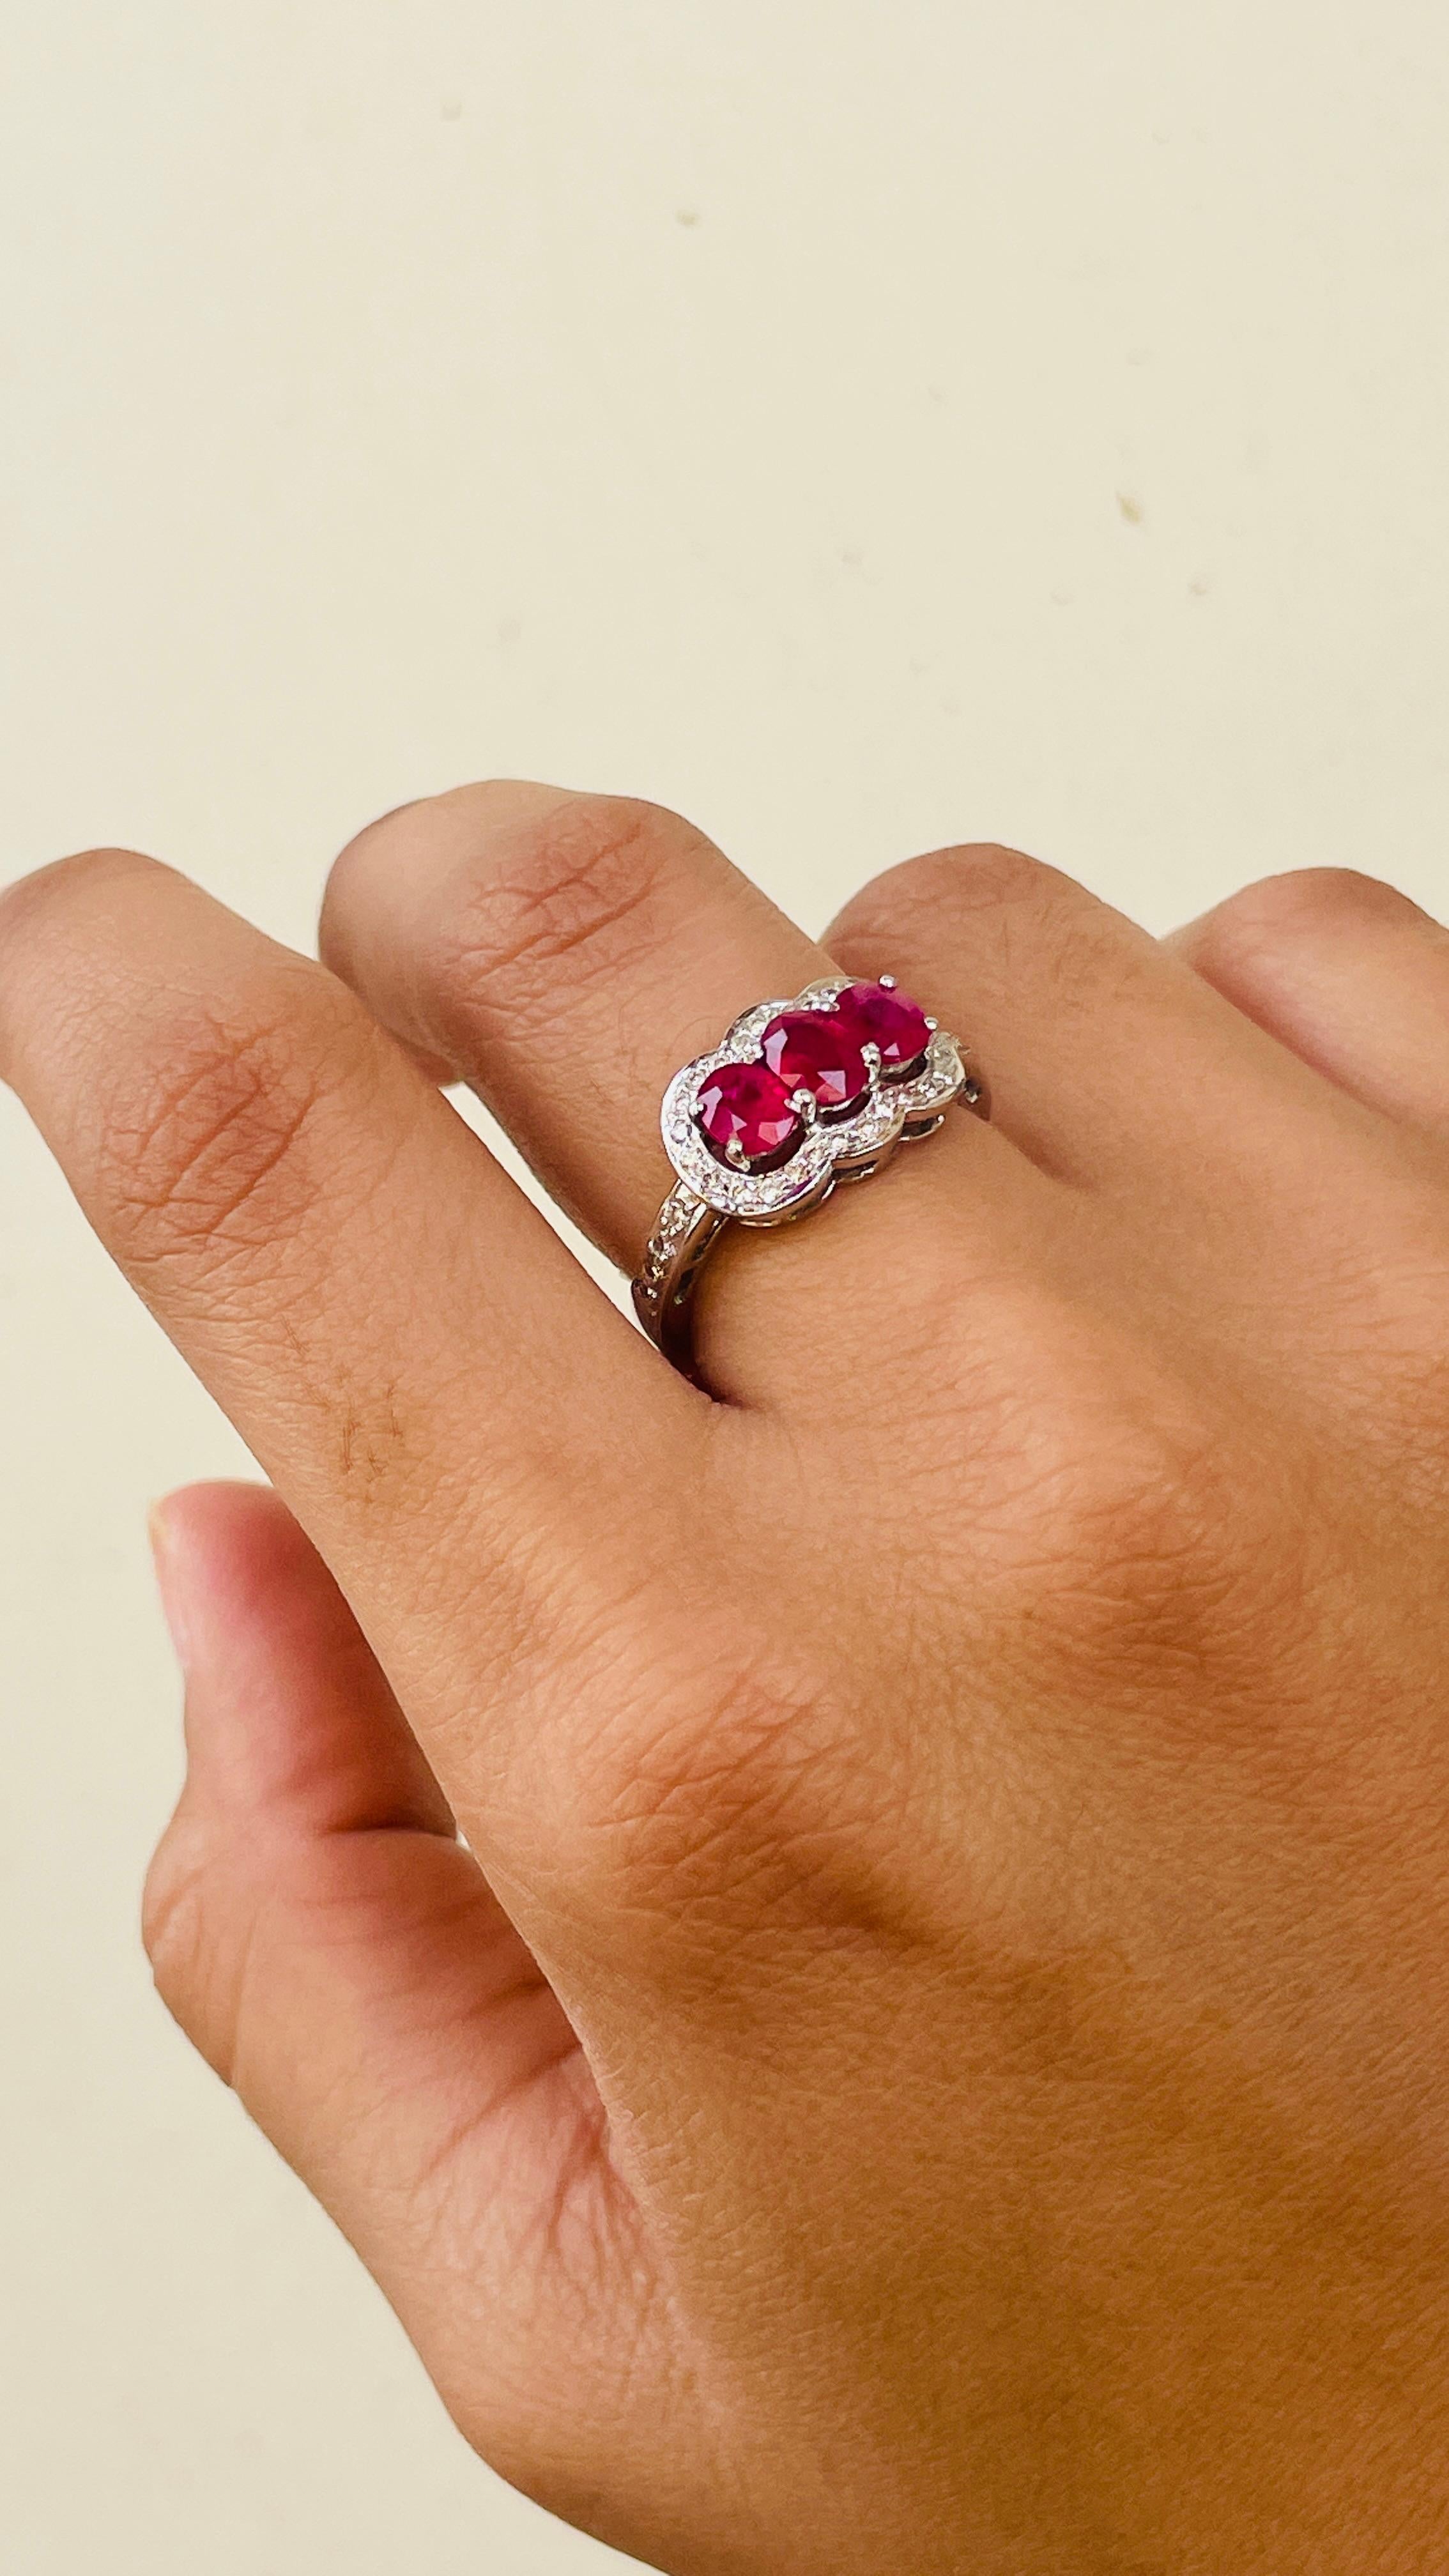 For Sale:  Oval Cut Three Stone Ruby Engagement Ring in 18K White Gold with Diamonds 12